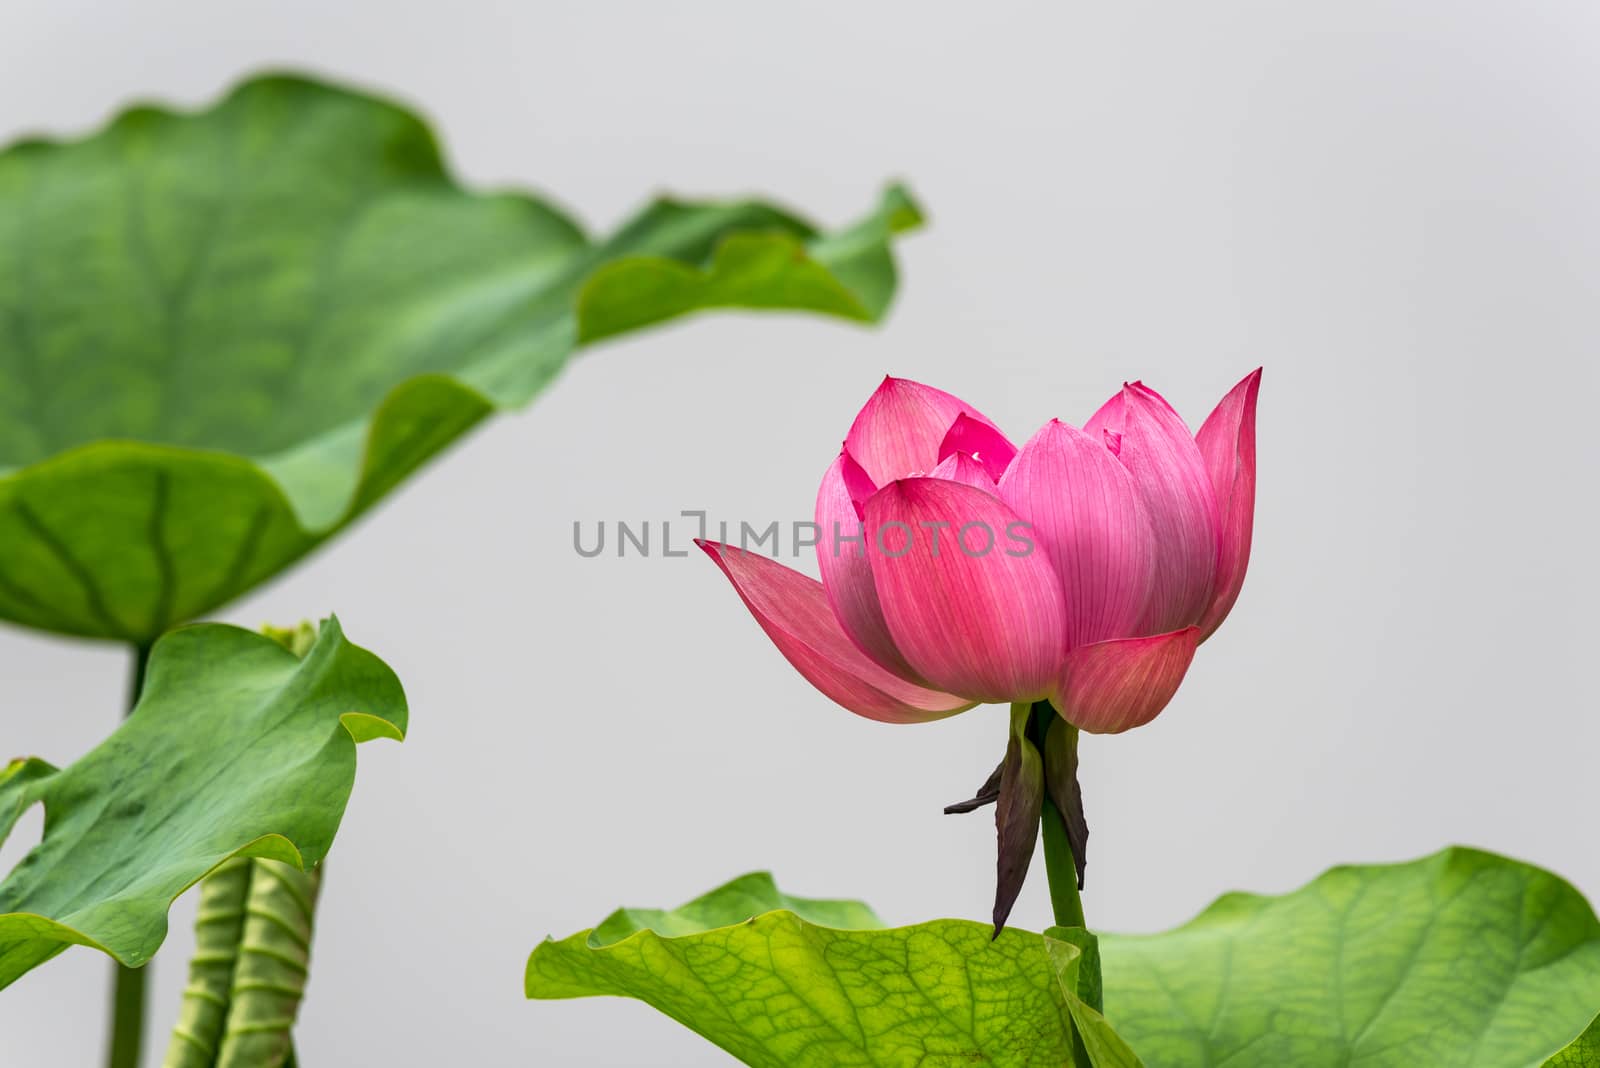 Lotus water lily flower close-up against grey background in China